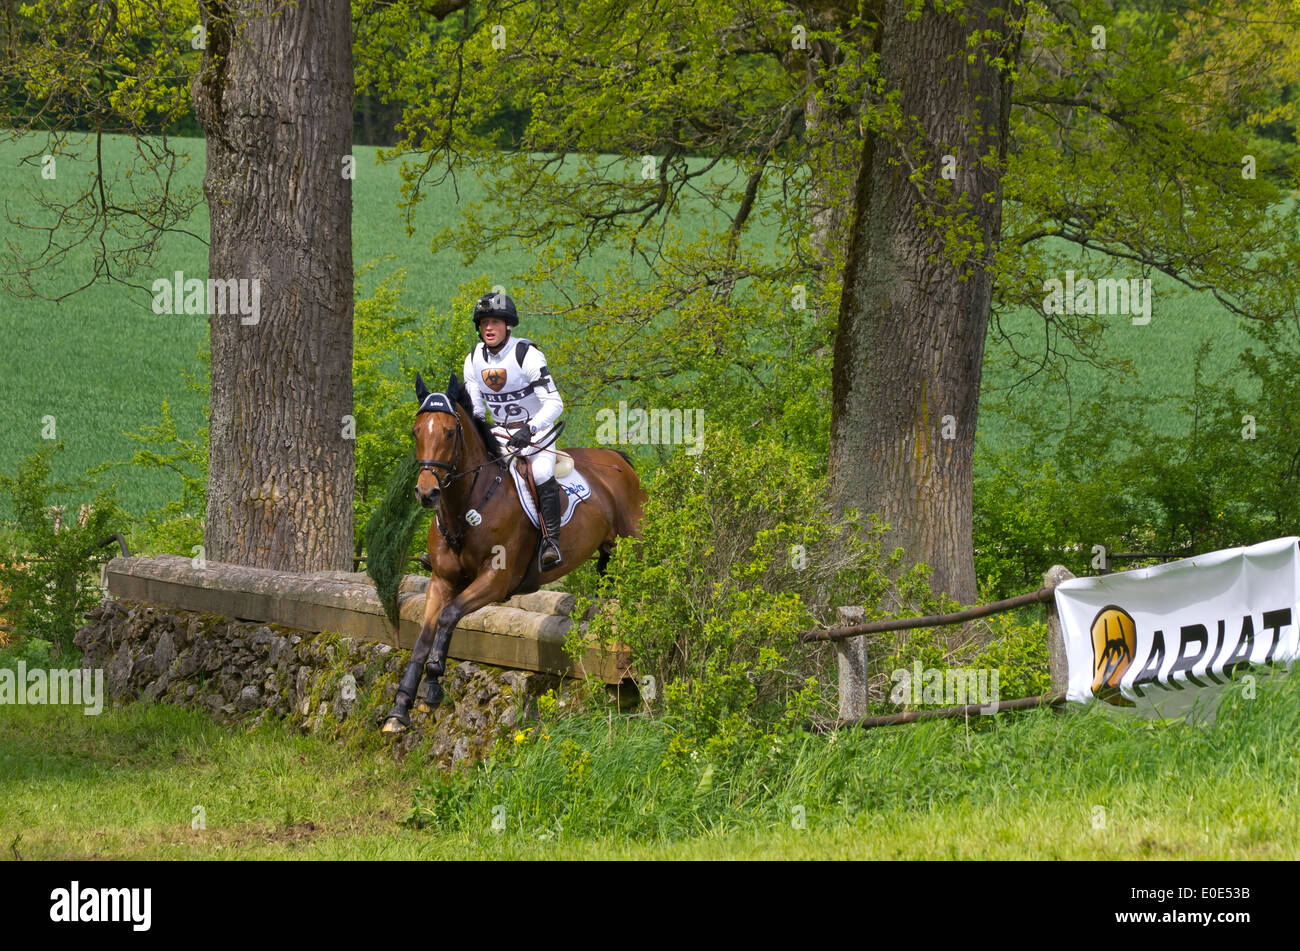 Olympic Champion Michael Jung on La Biosthetique-Sam FBW, Marbach Eventing, May 10, 2014 Stock Photo